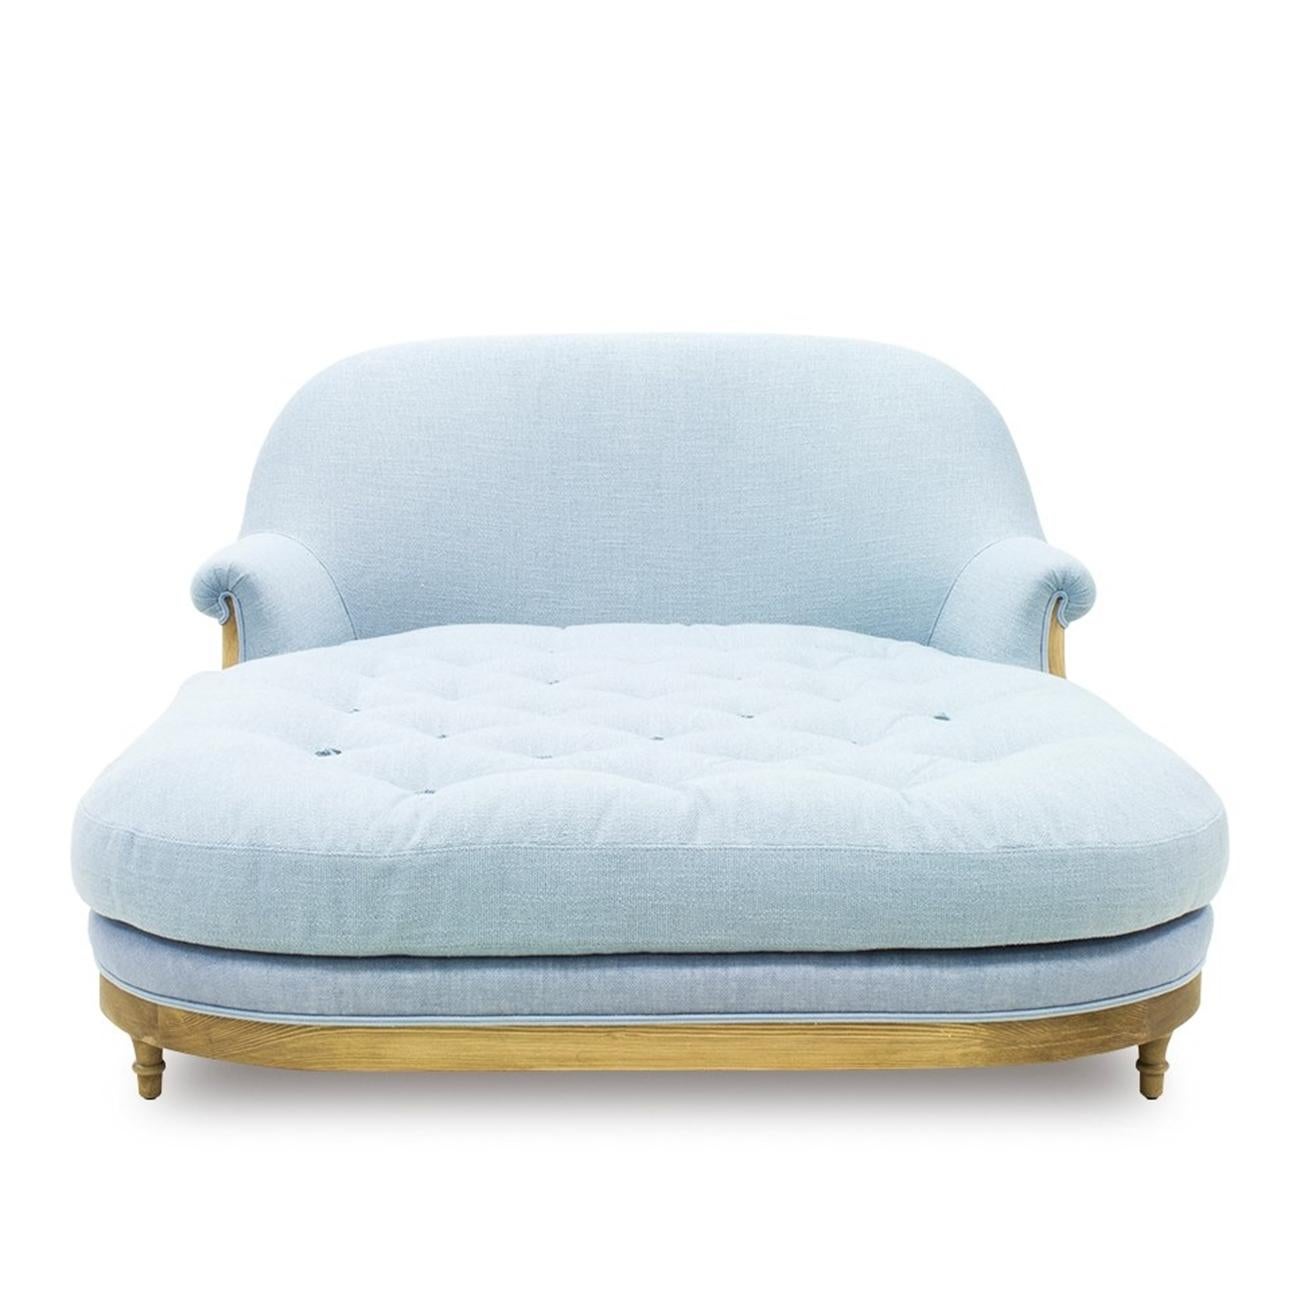 Daybed Sofa Rochas with structure in solid beech wood,
upholstered and covered with linen fabric Cat 1. in bluesky color.
Also available with other linen fabric colors, on request.
 